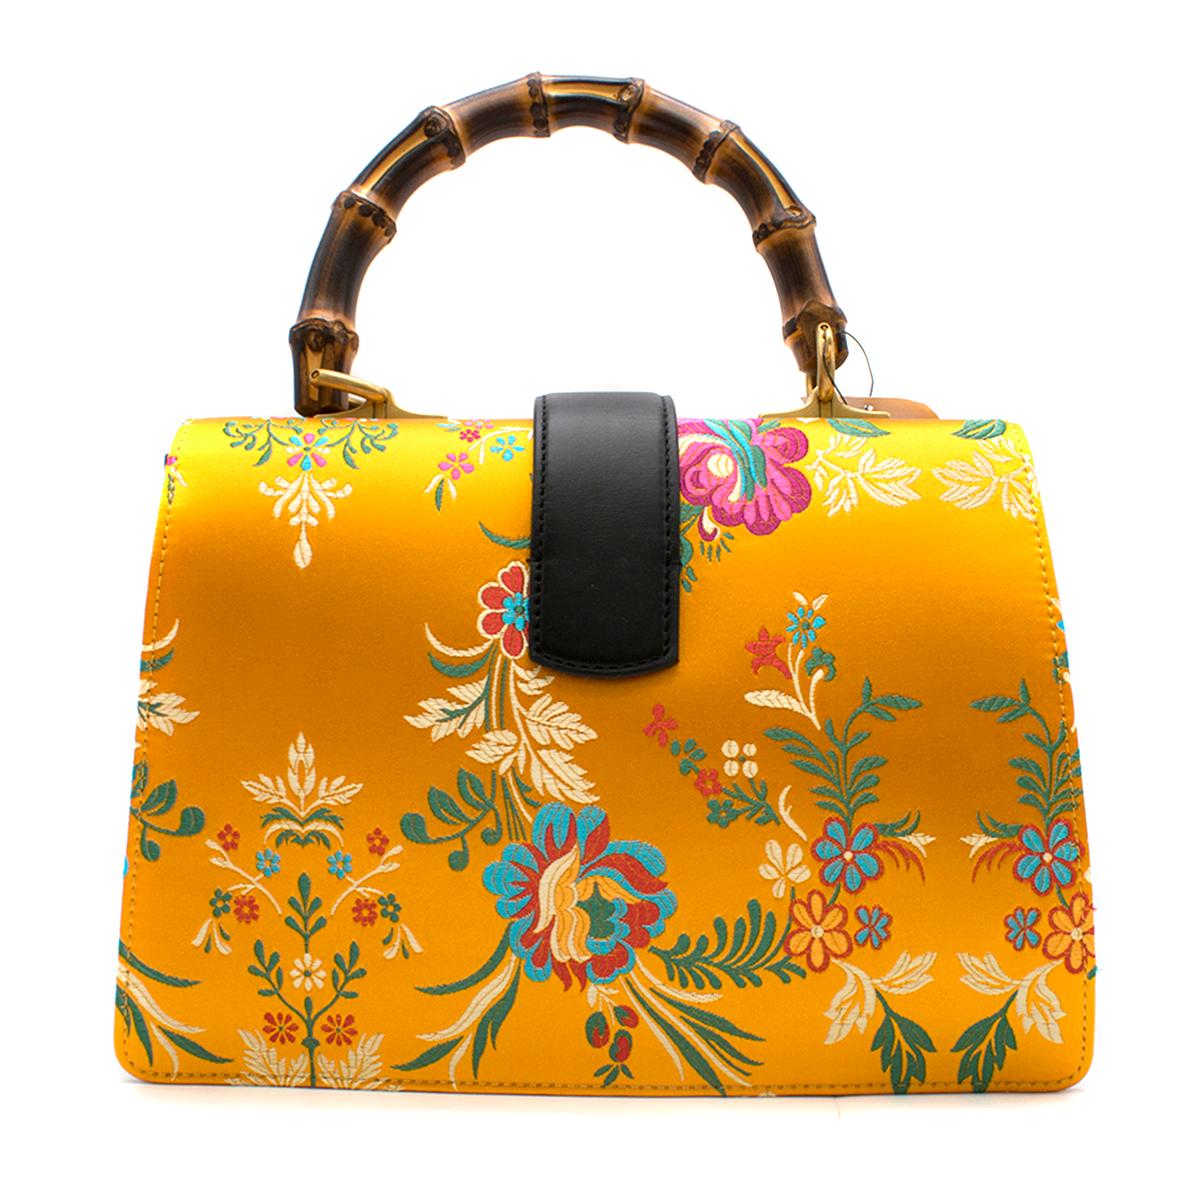 gucci bag with yellow handle